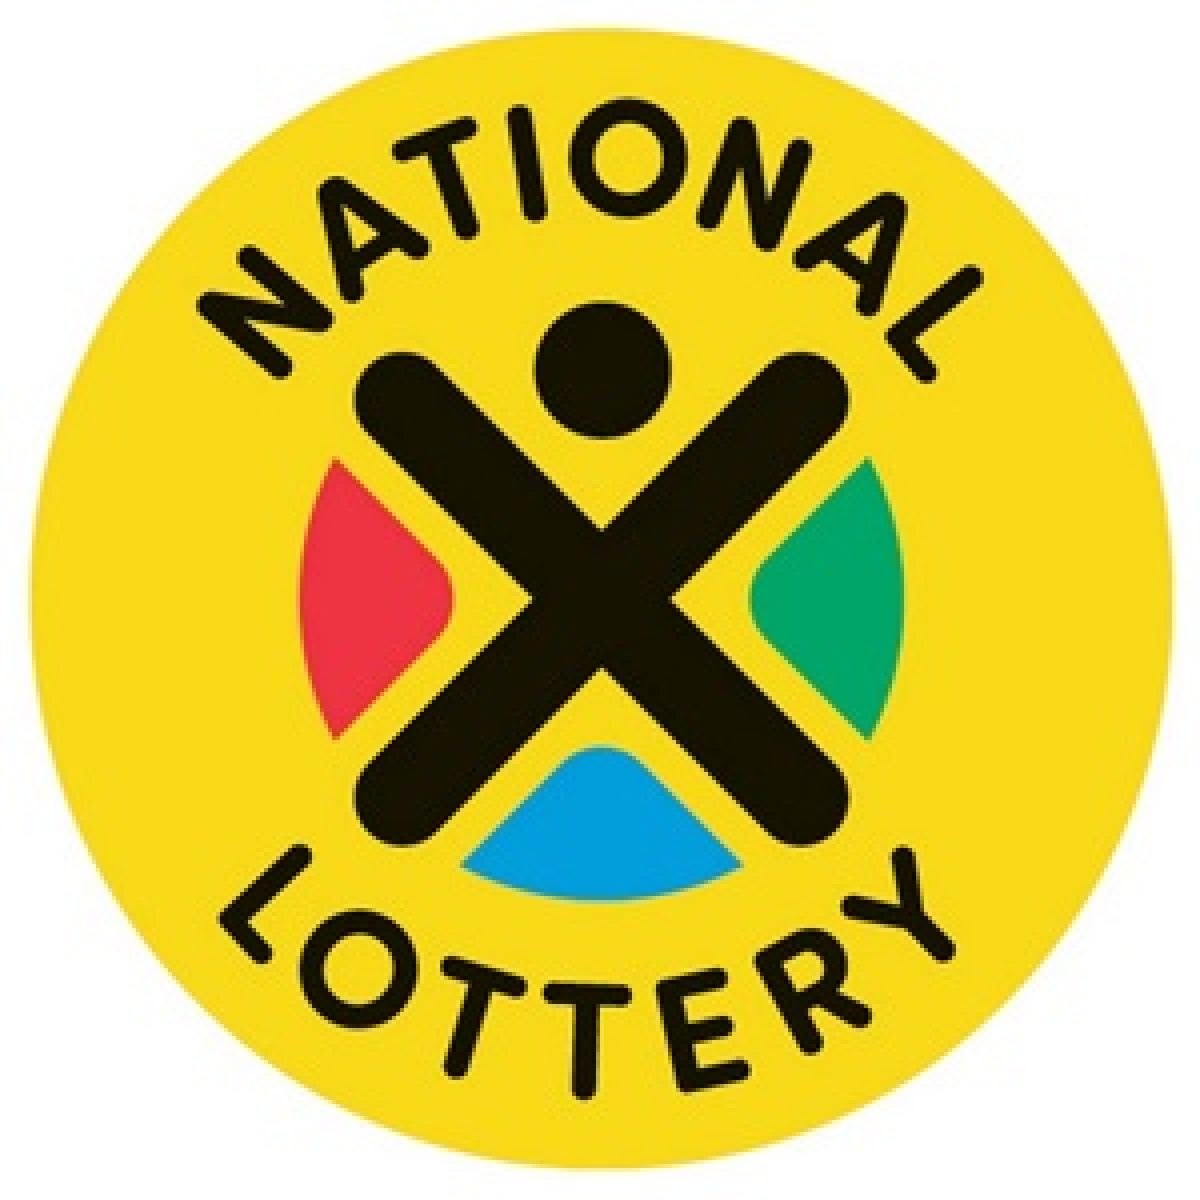 national lottery lotto results for today